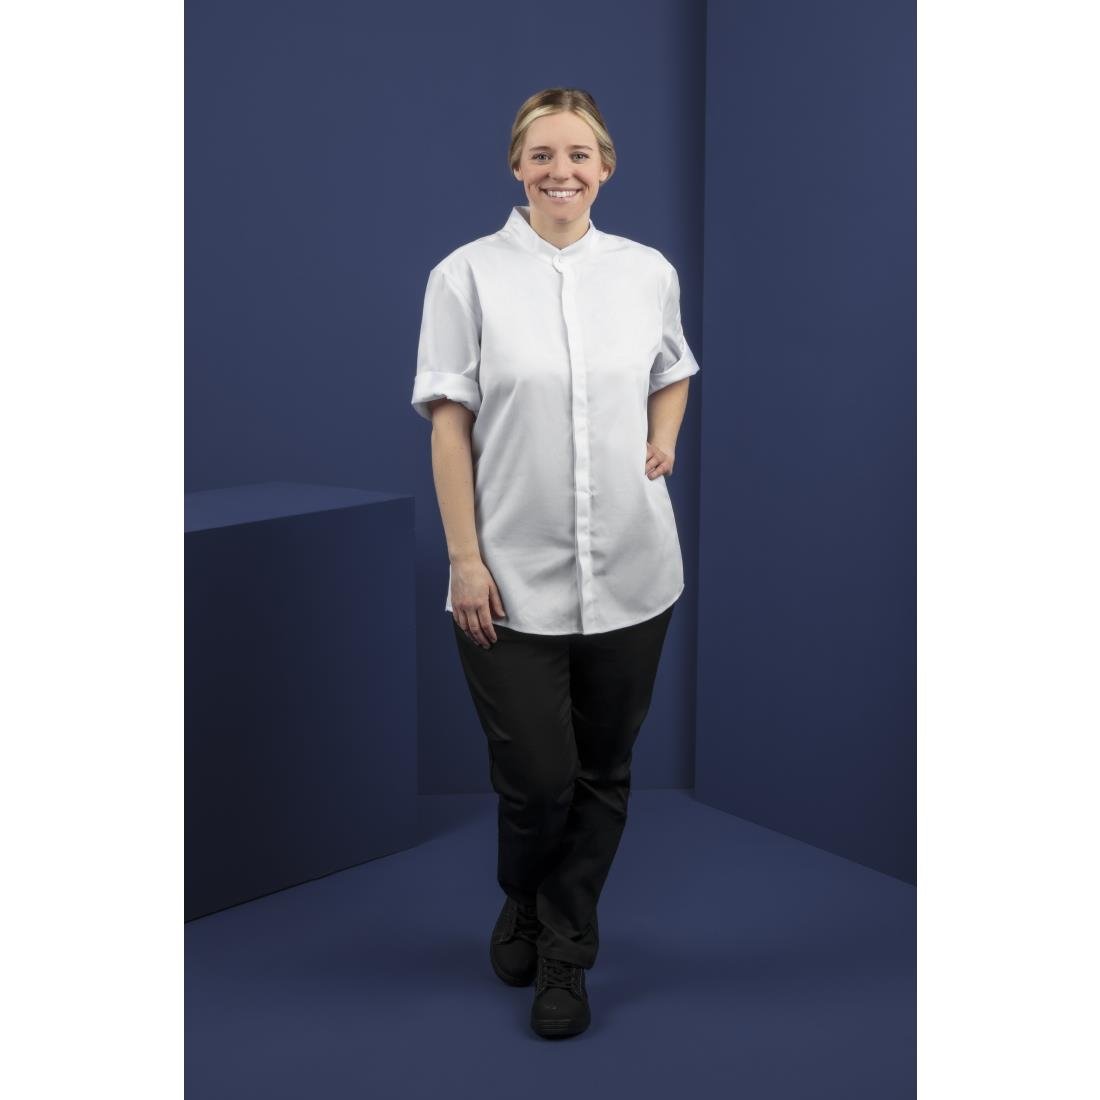 BB702-XL Southside Band Collar Chefs Jacket White Size XL JD Catering Equipment Solutions Ltd